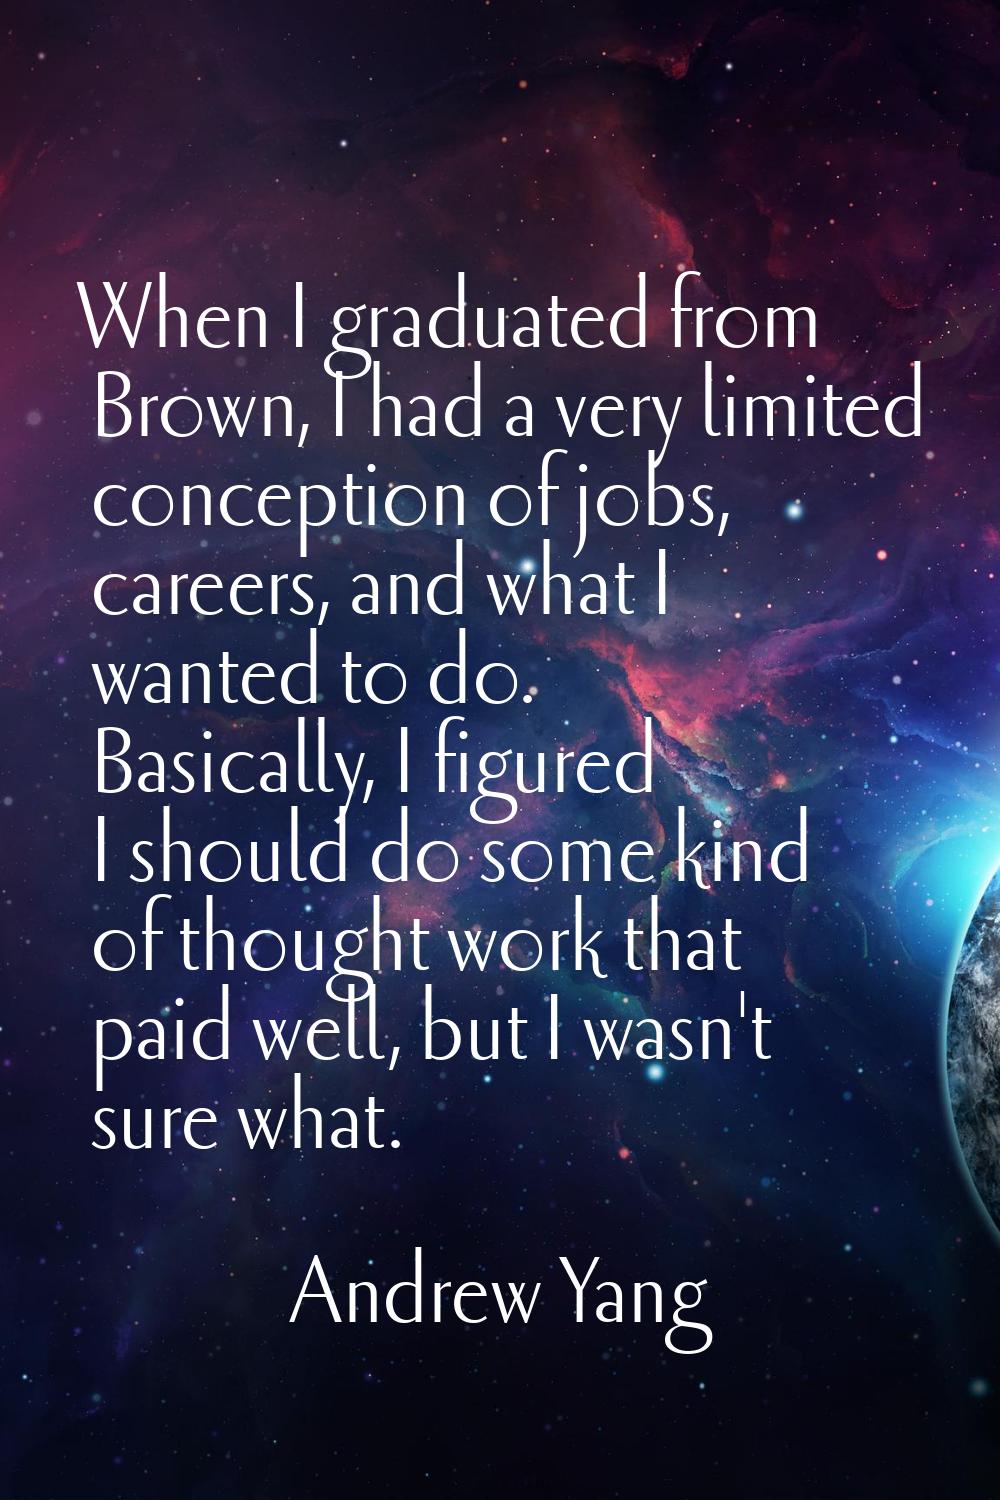 When I graduated from Brown, I had a very limited conception of jobs, careers, and what I wanted to